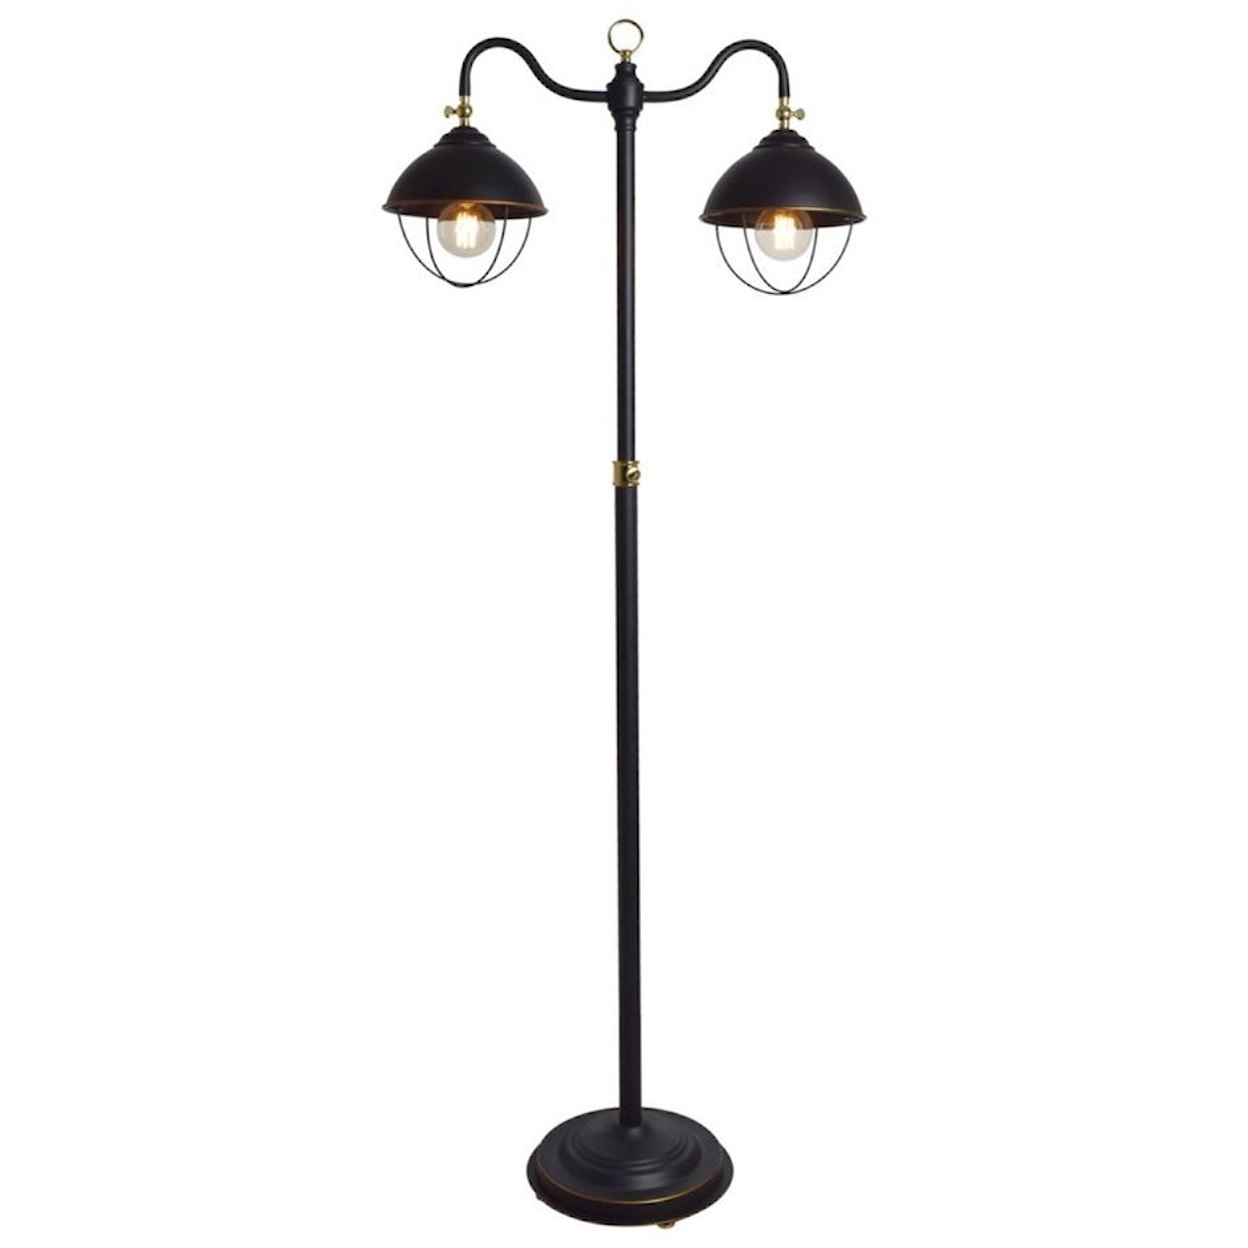 Crestview Collection Lighting Times Square Floor Lamp